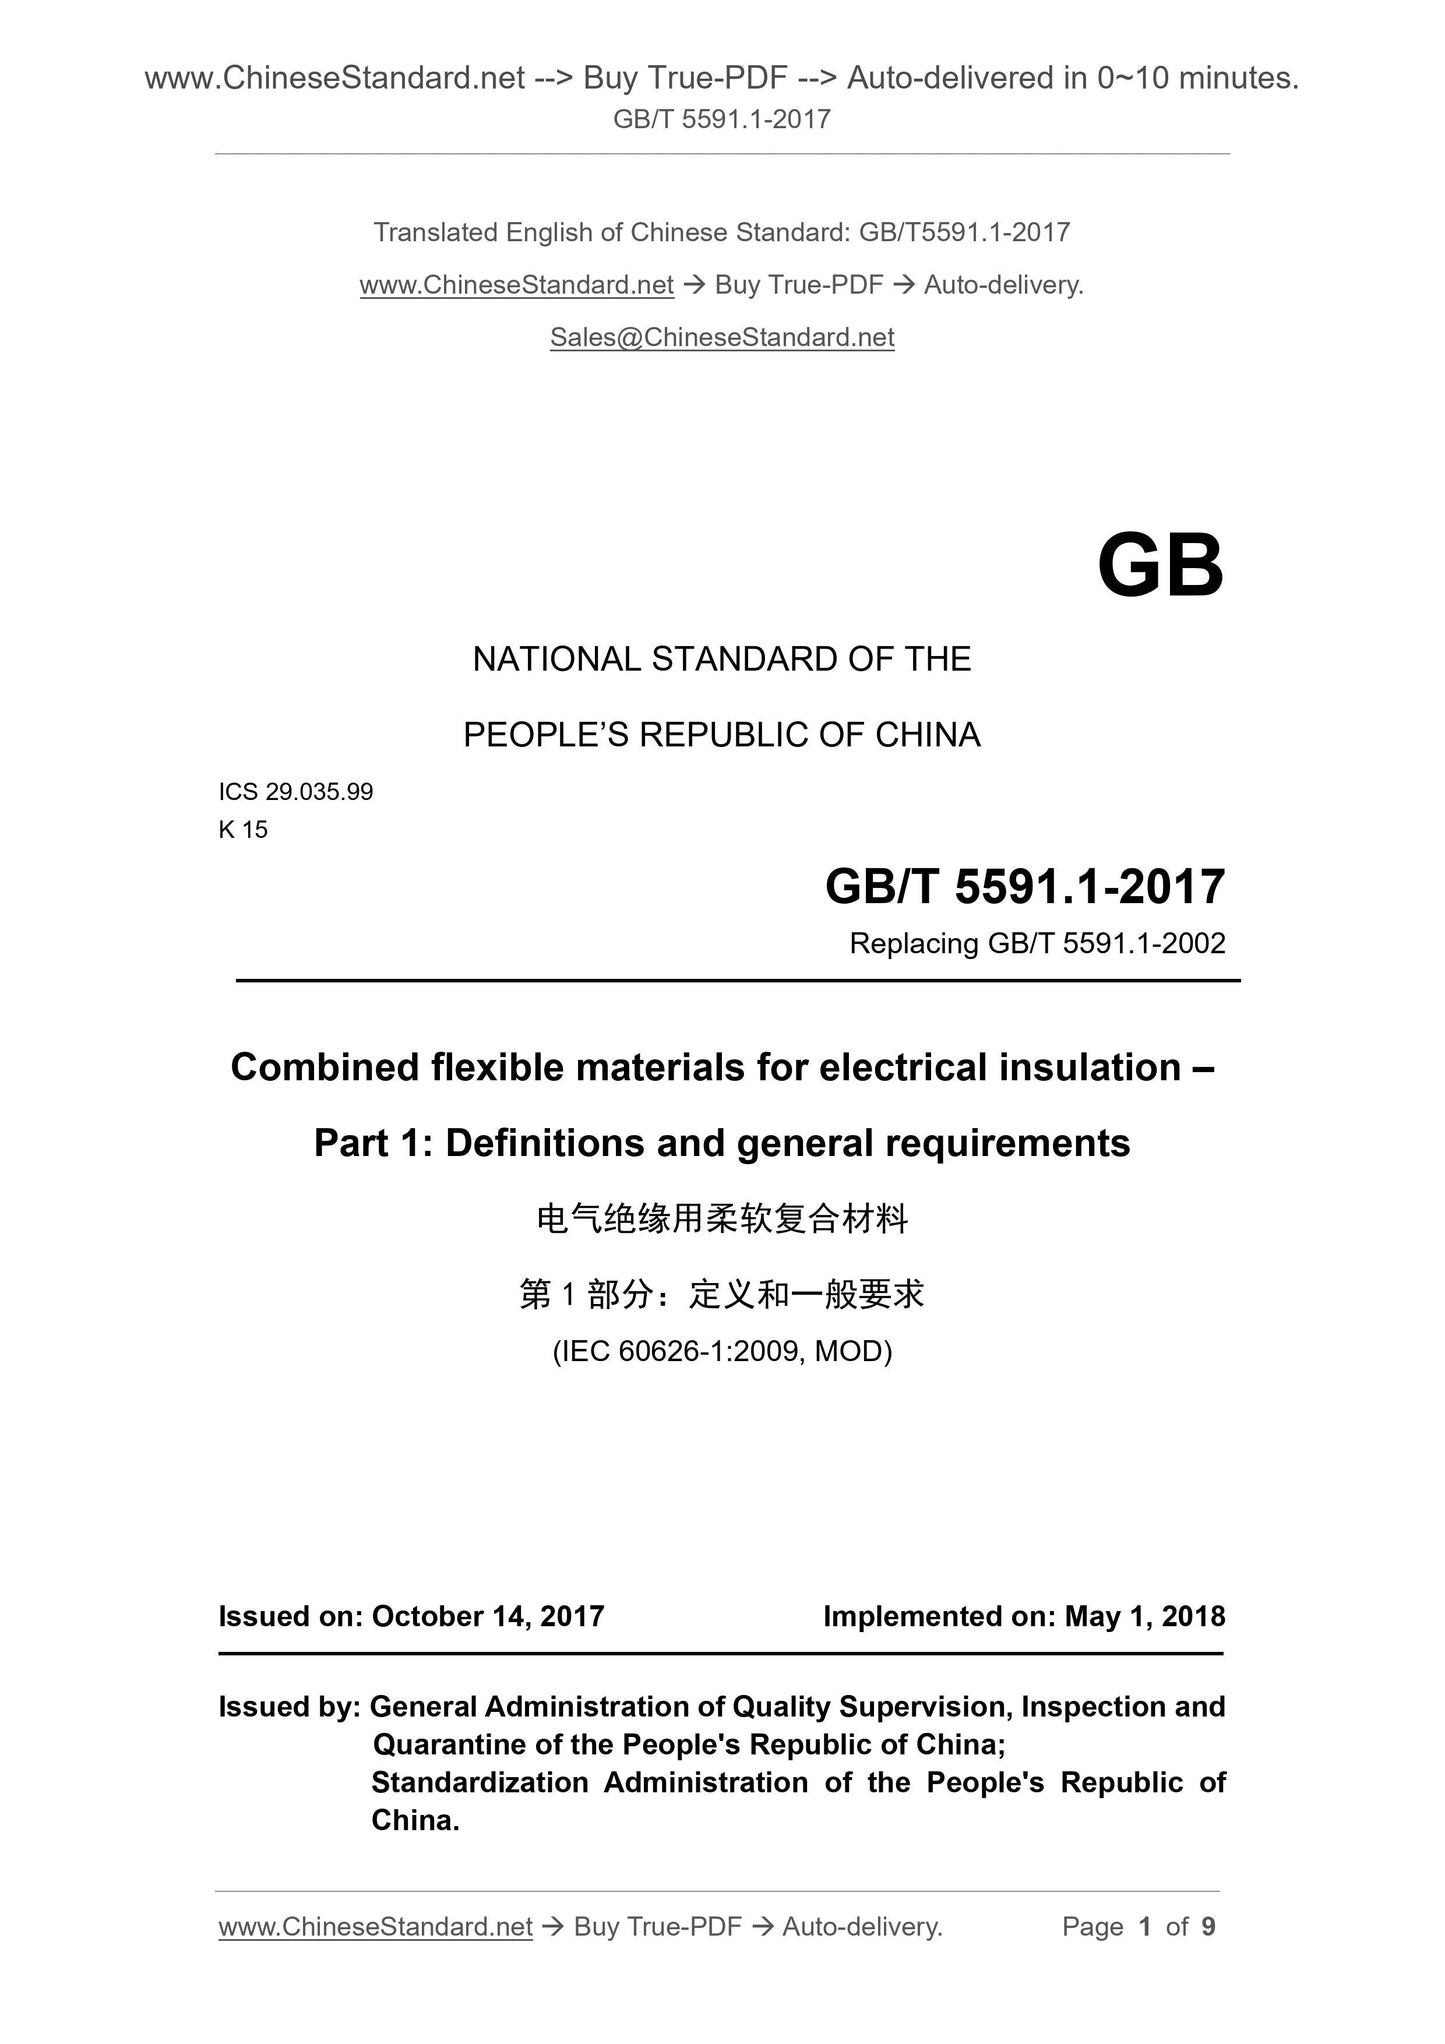 GB/T 5591.1-2017 Page 1